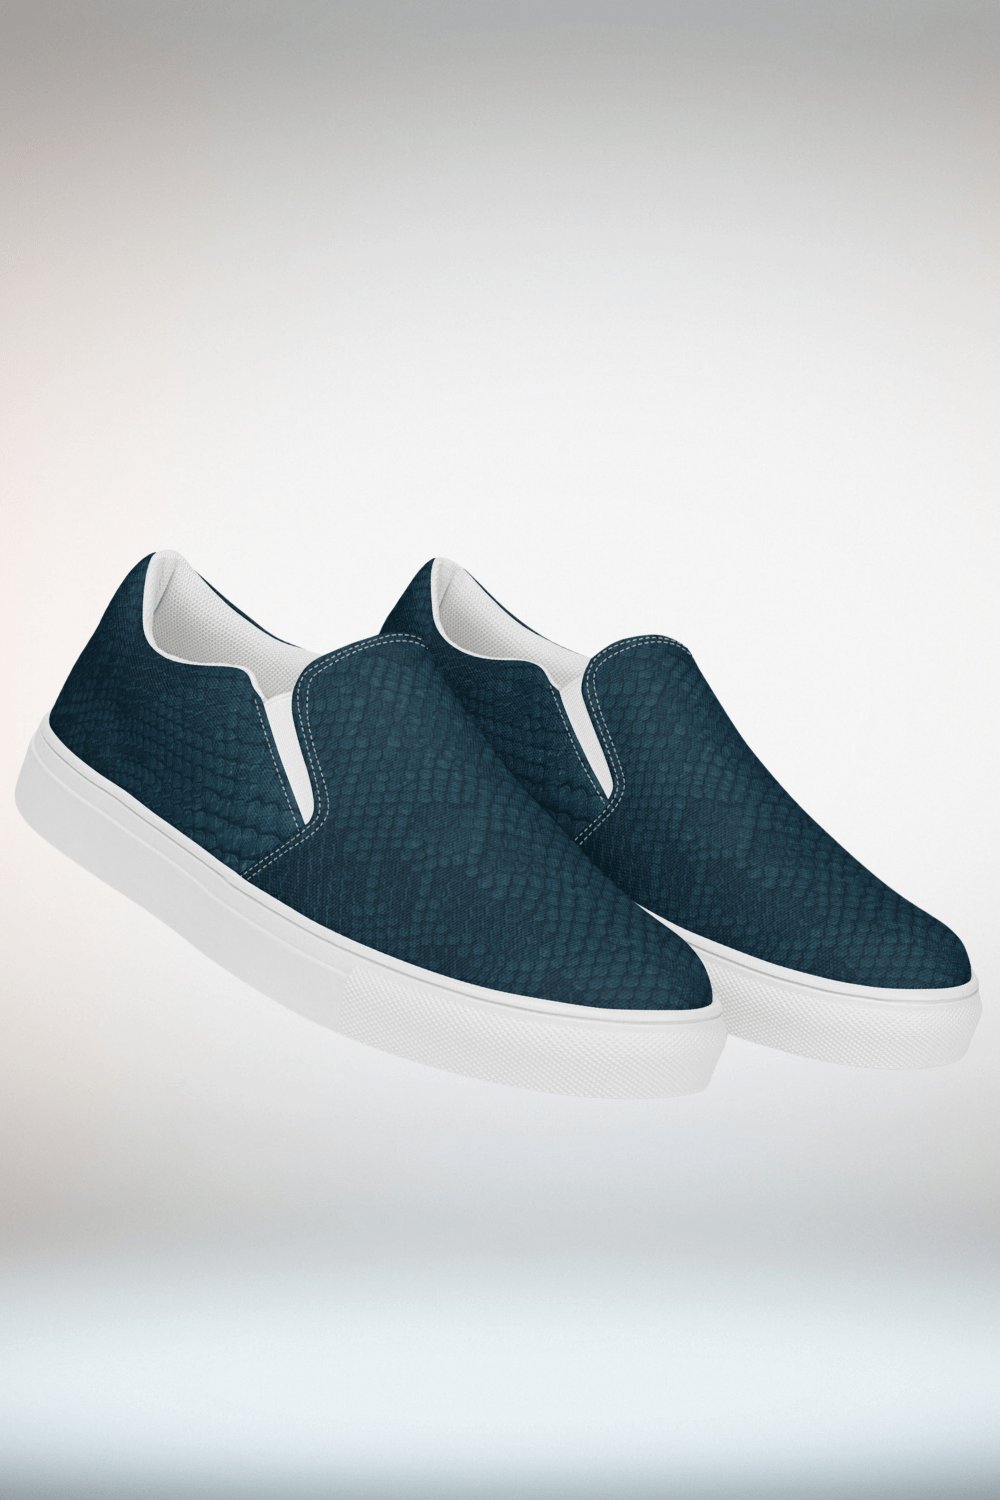 Dark Green Slip On Canvas Shoes - TGC Boutique - Slip On Shoes